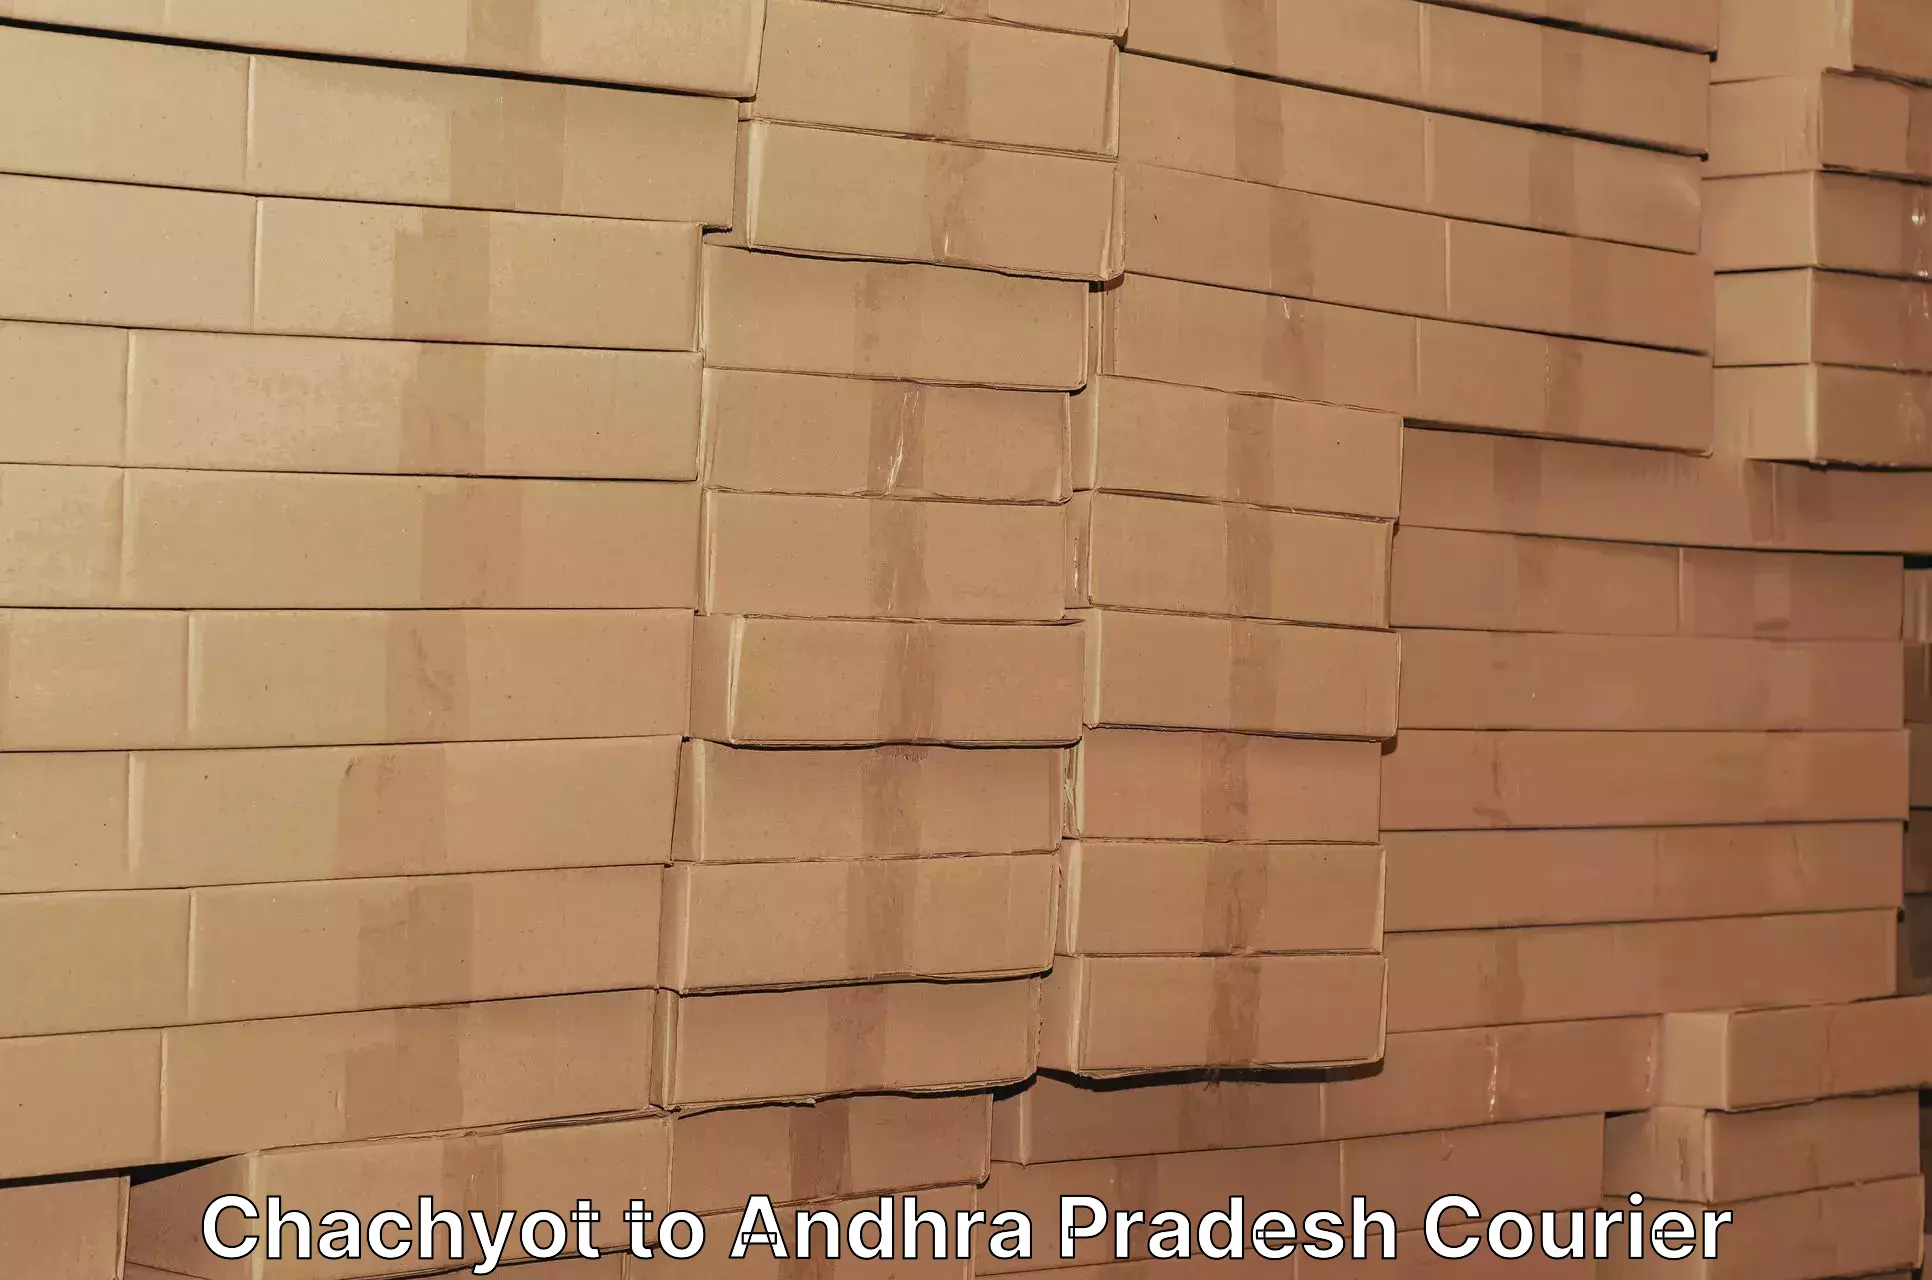 Quick dispatch service Chachyot to Andhra Pradesh